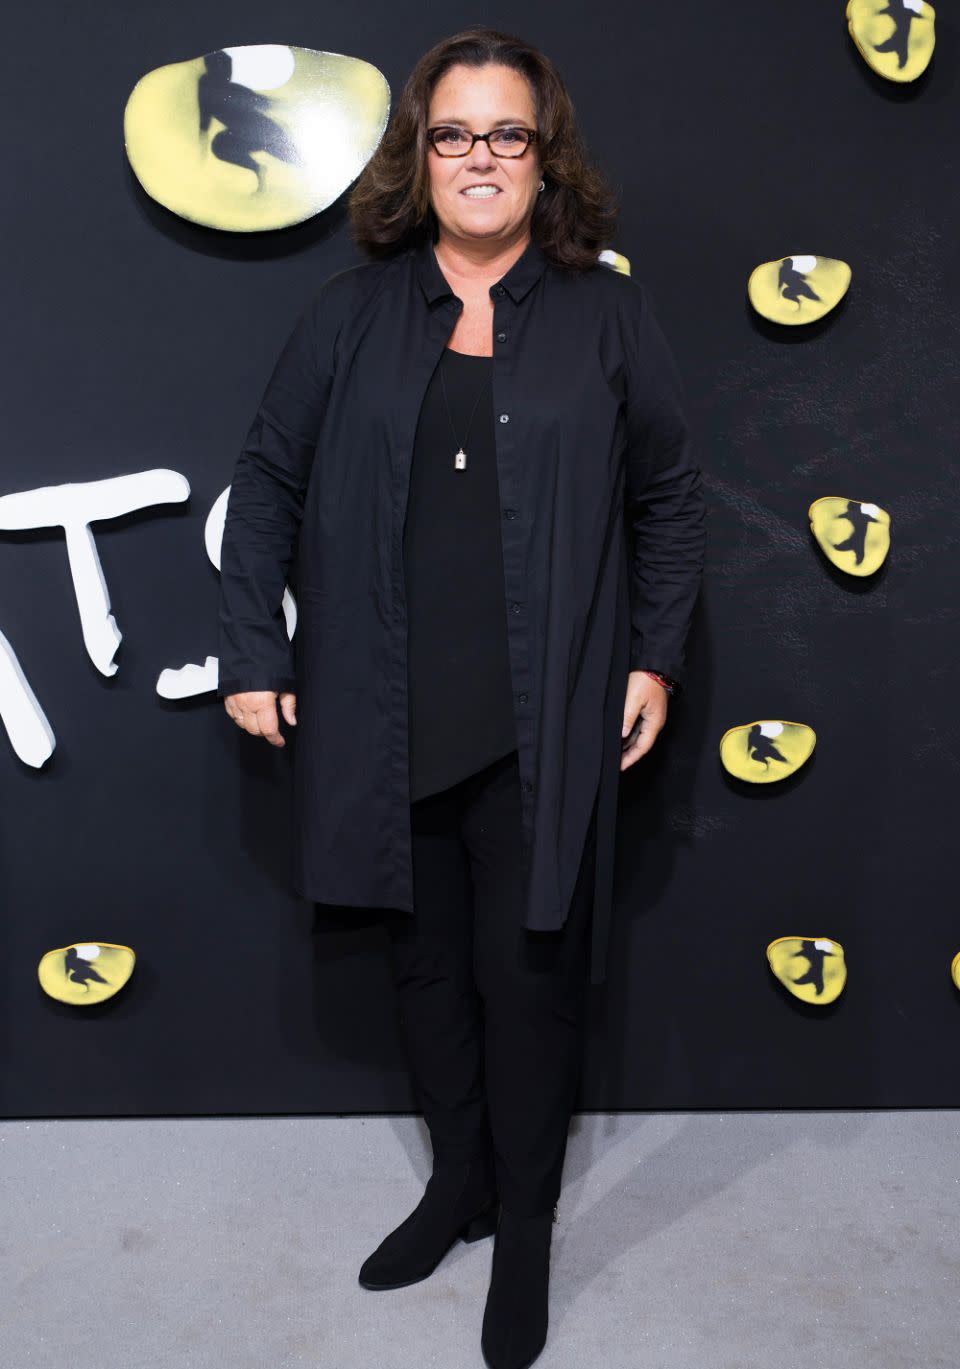 Rosie O'Donnell - pictured here last year - was also in the running. Source: Getty